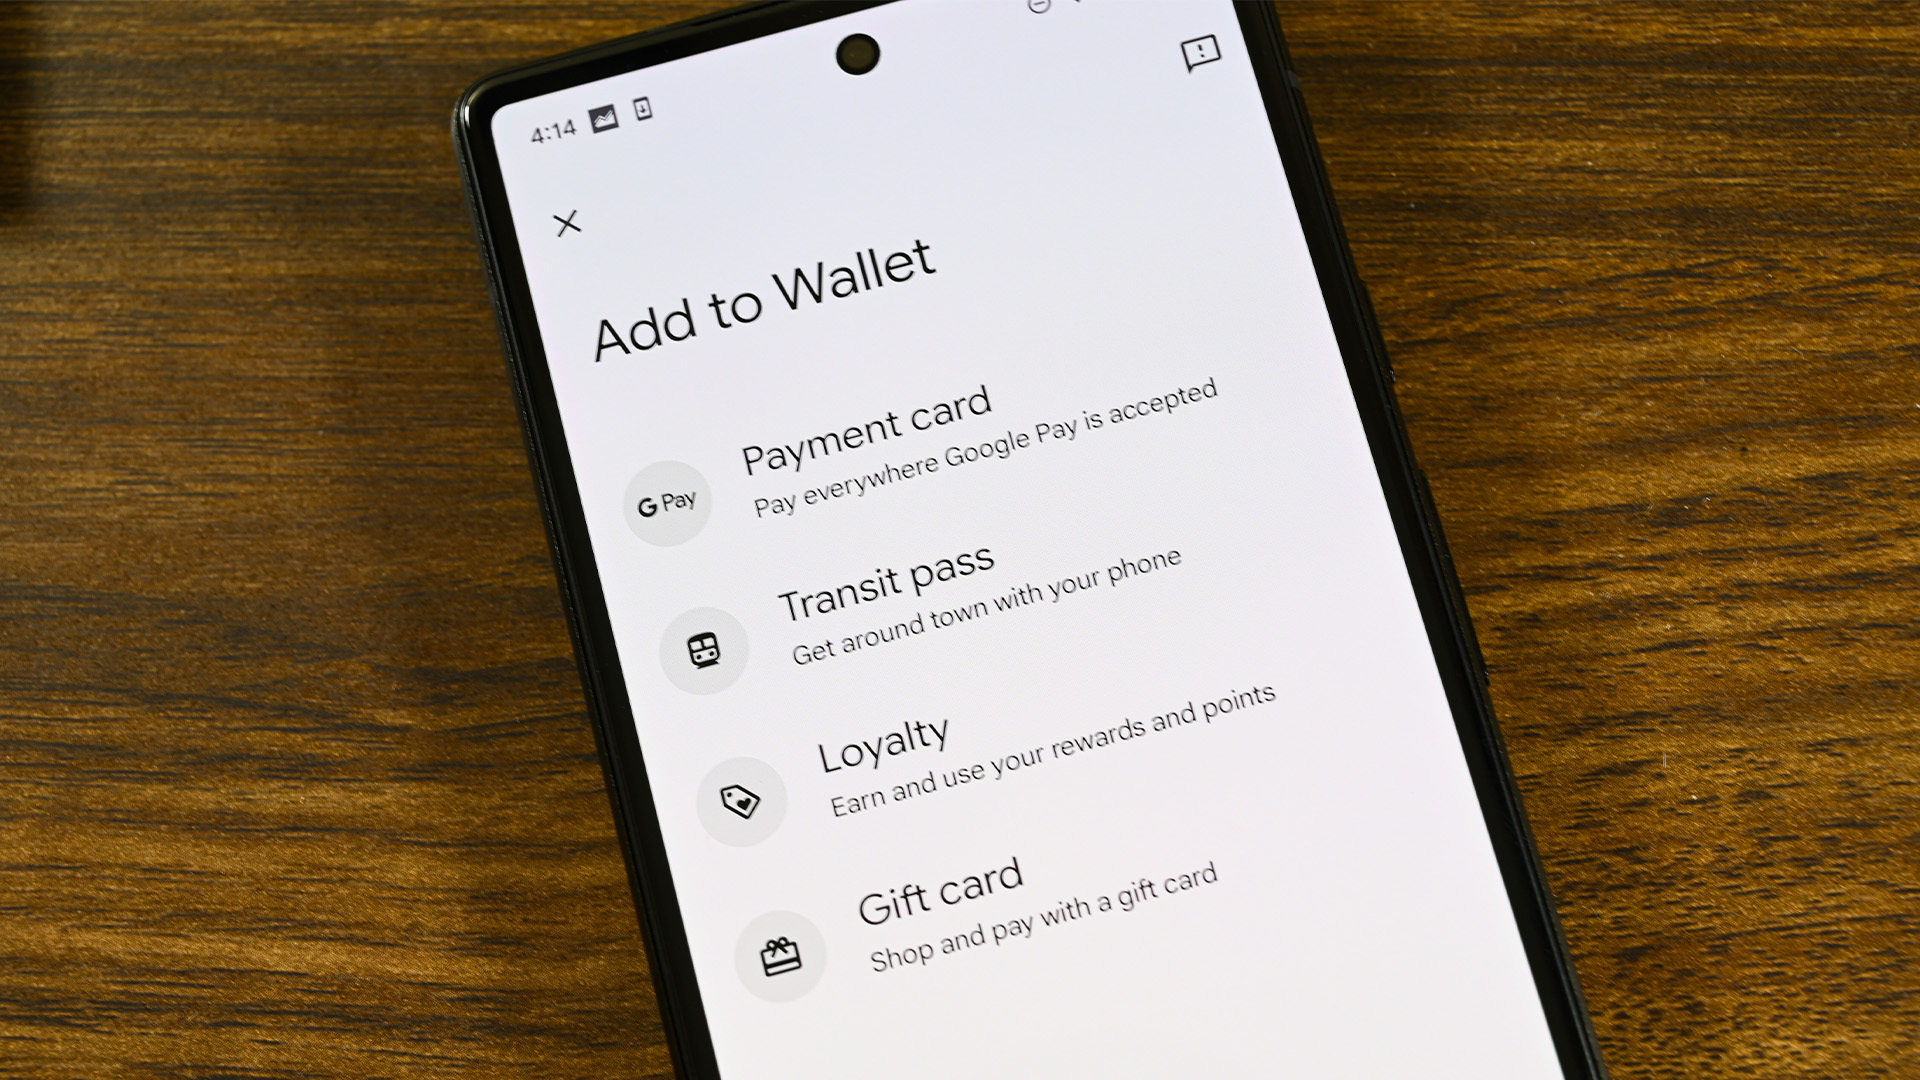 A photo of a smartphone showing the Google Wallet app's &quot;Add to Wallet&quot; screen showing various payment methods.